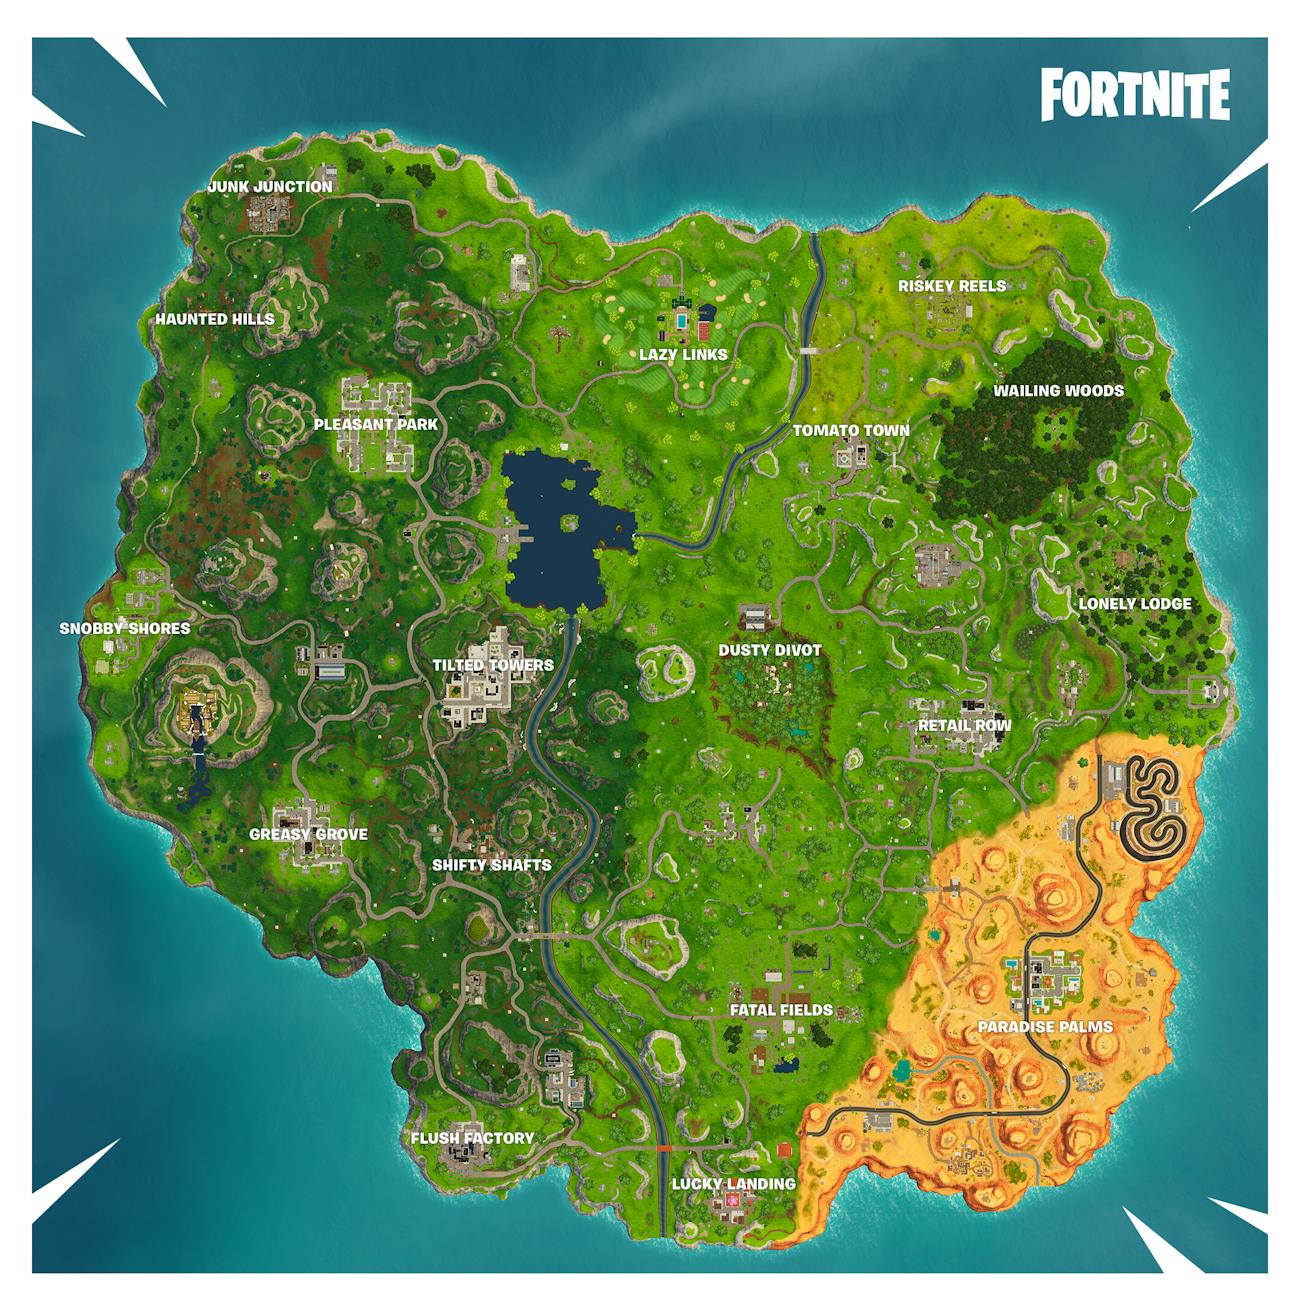 the fortnite battle royale got some radical changes with season 5 - how many locations are in fortnite season 5